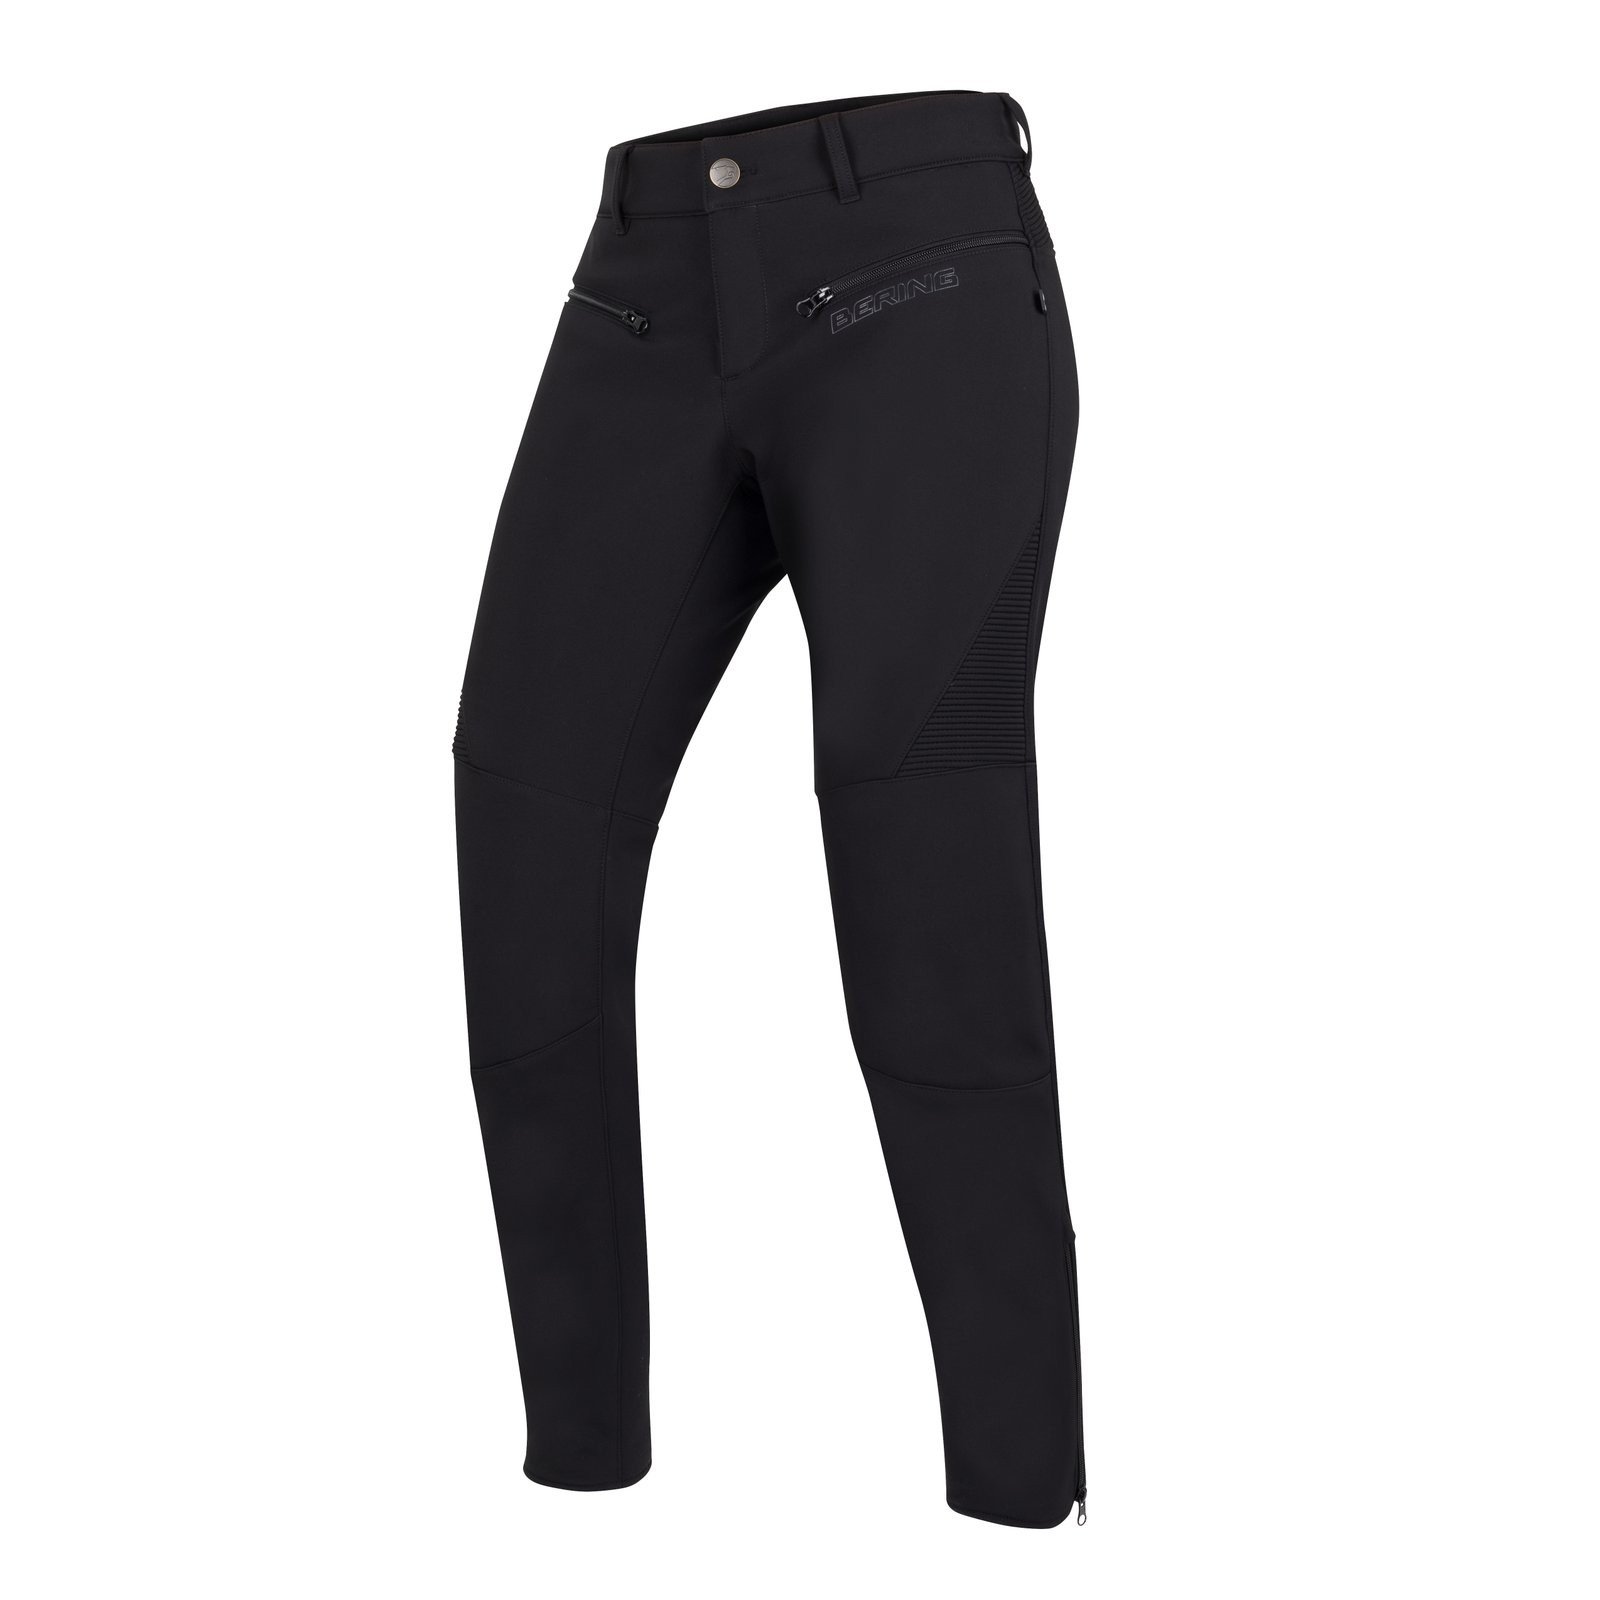 Image of Bering Lady Alkor Trousers Black Size T3 ID 3660815150849